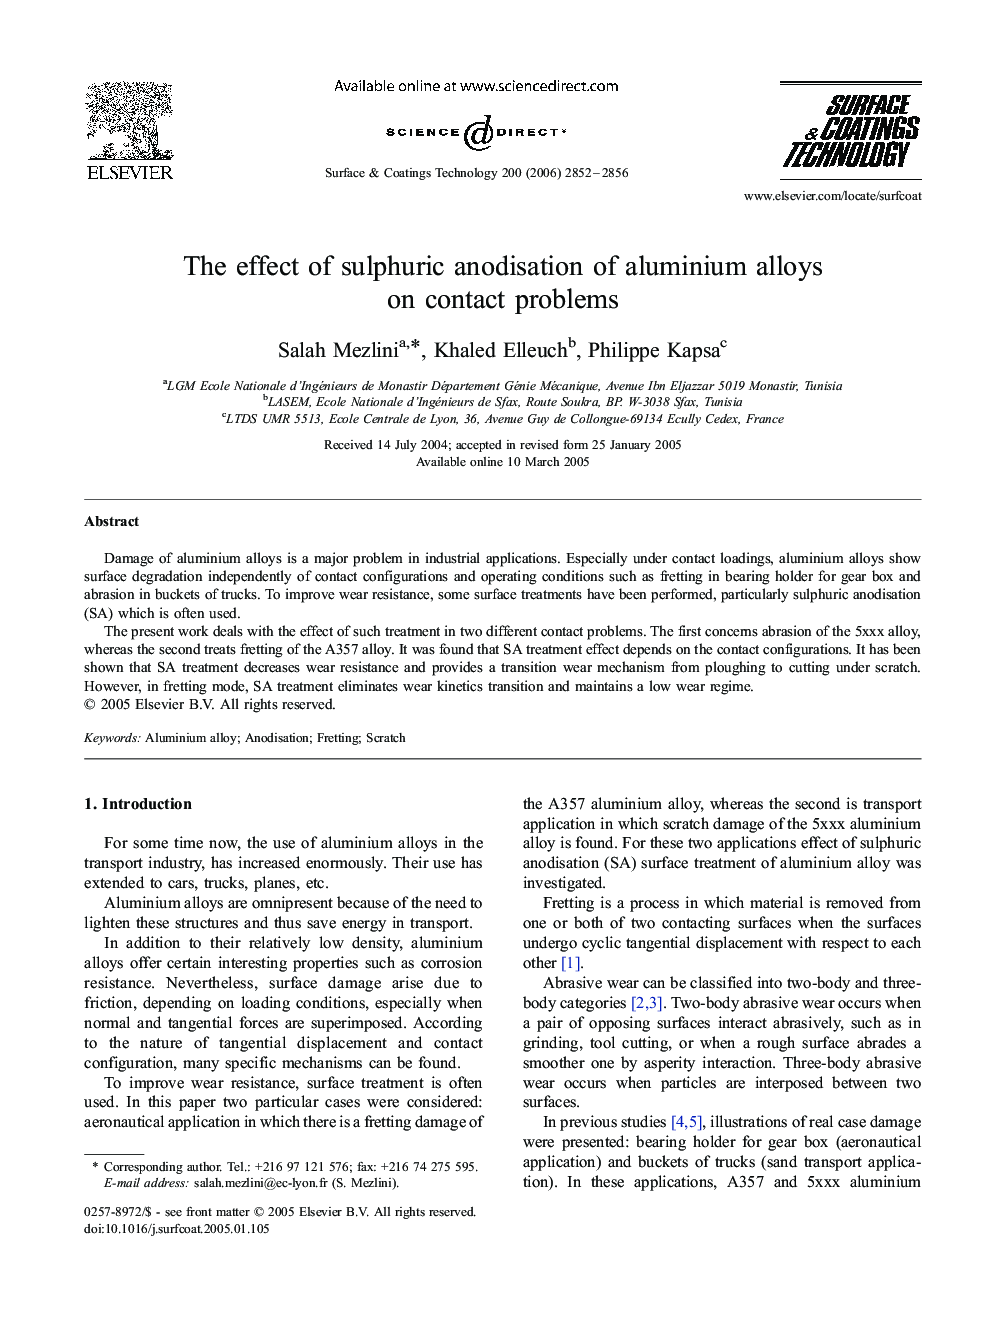 The effect of sulphuric anodisation of aluminium alloys on contact problems